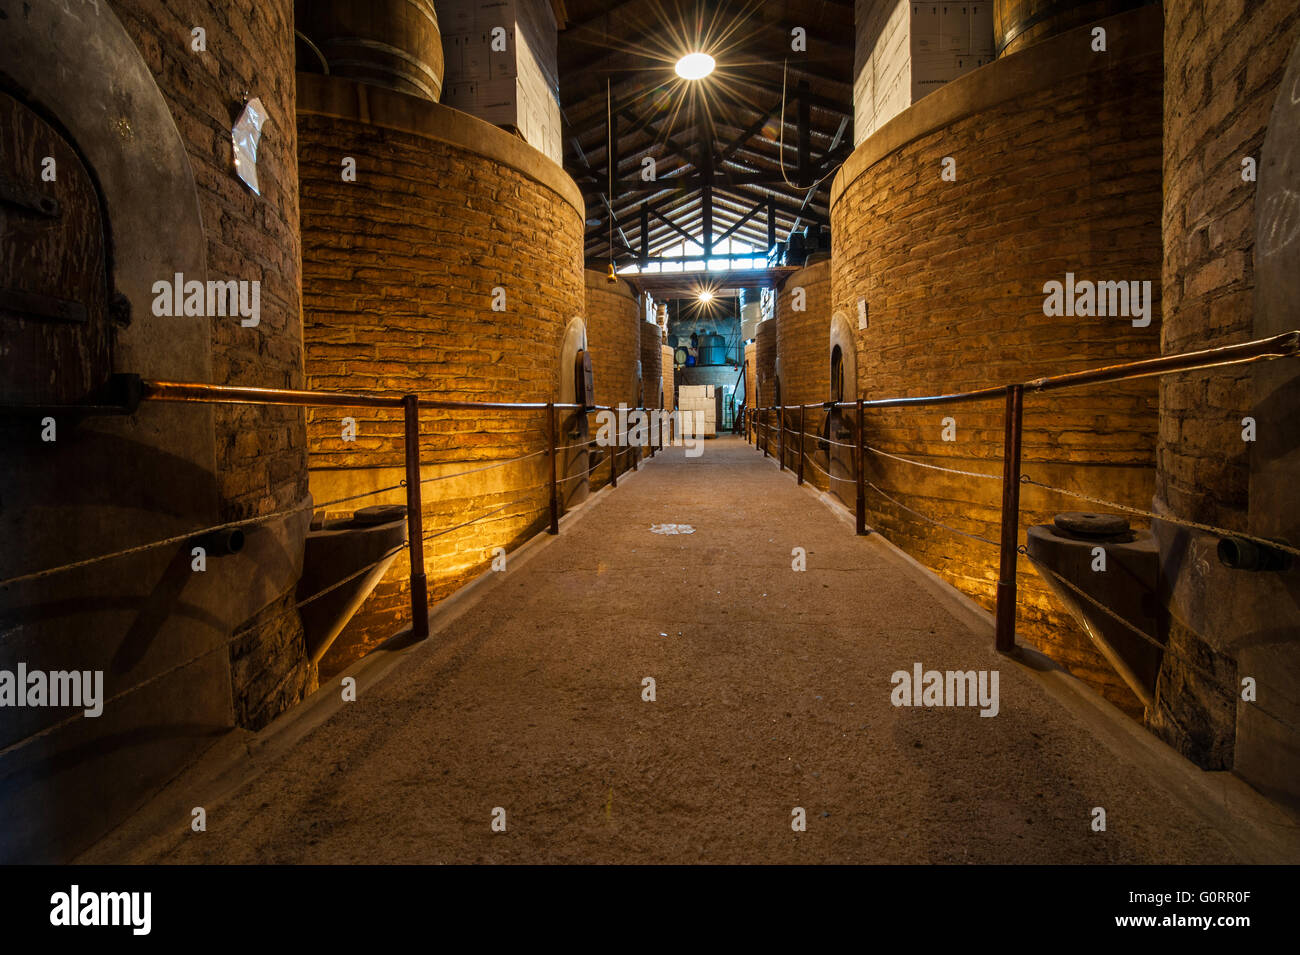 Old brick wine barrels for aging wine, took it in a winery in Mendoza, Argentina Stock Photo